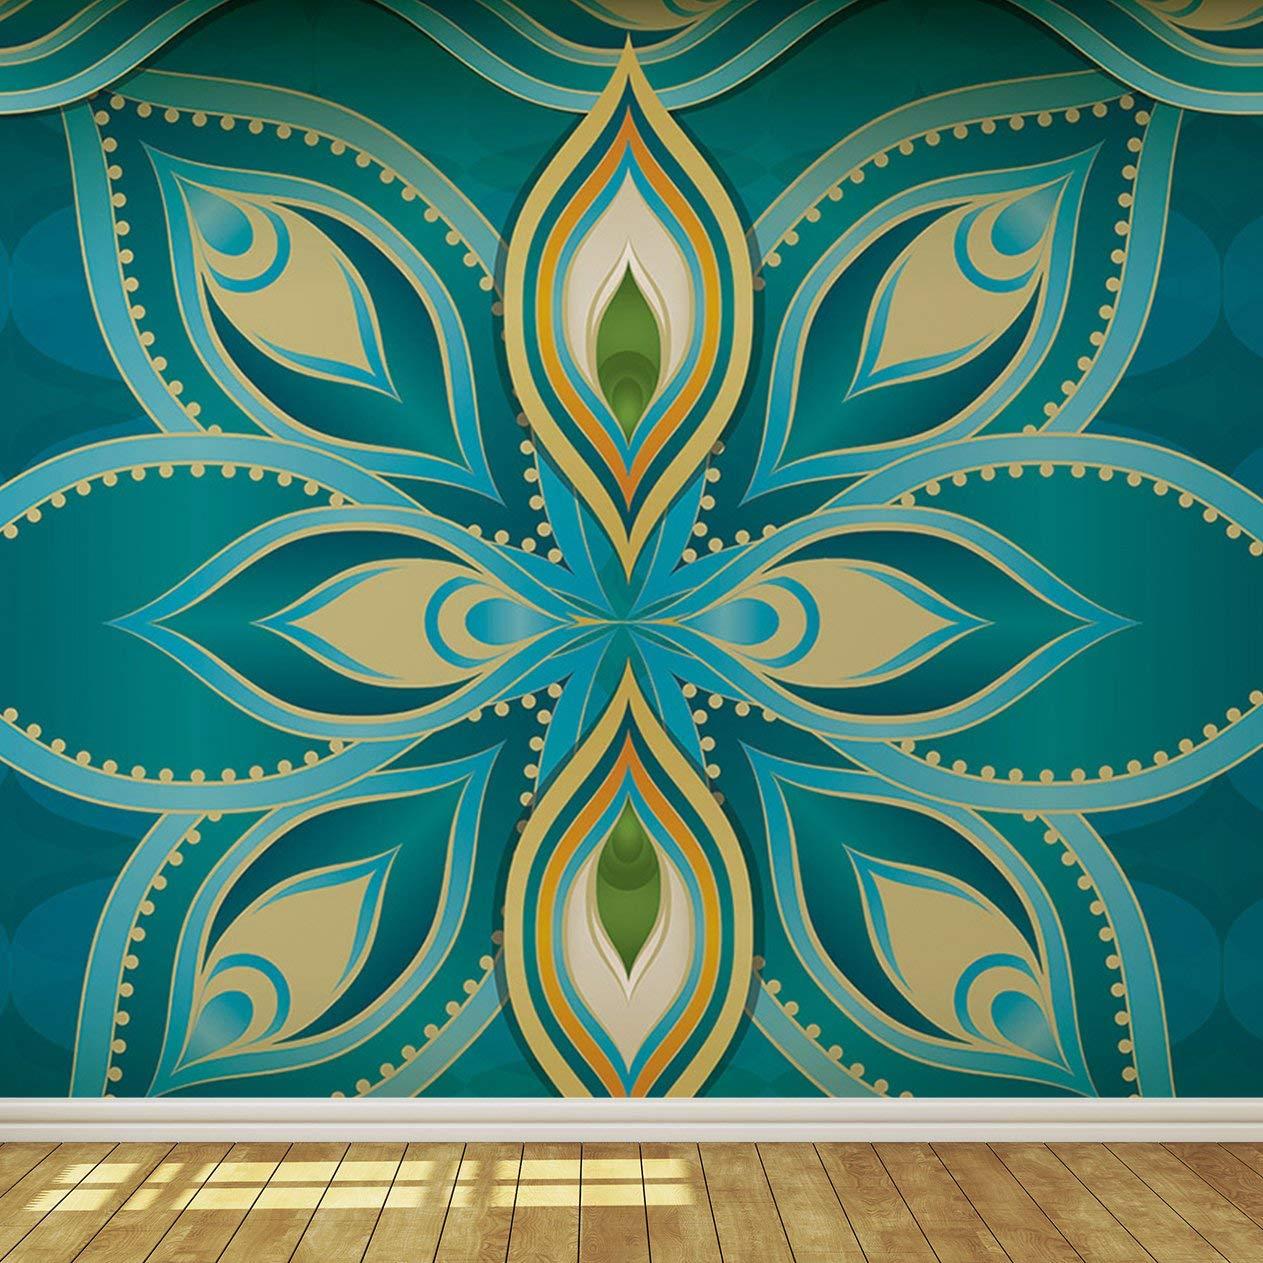 Blue Teal and Gold Exotic Indian Pattern Wallpaper Mural: Amazon.co